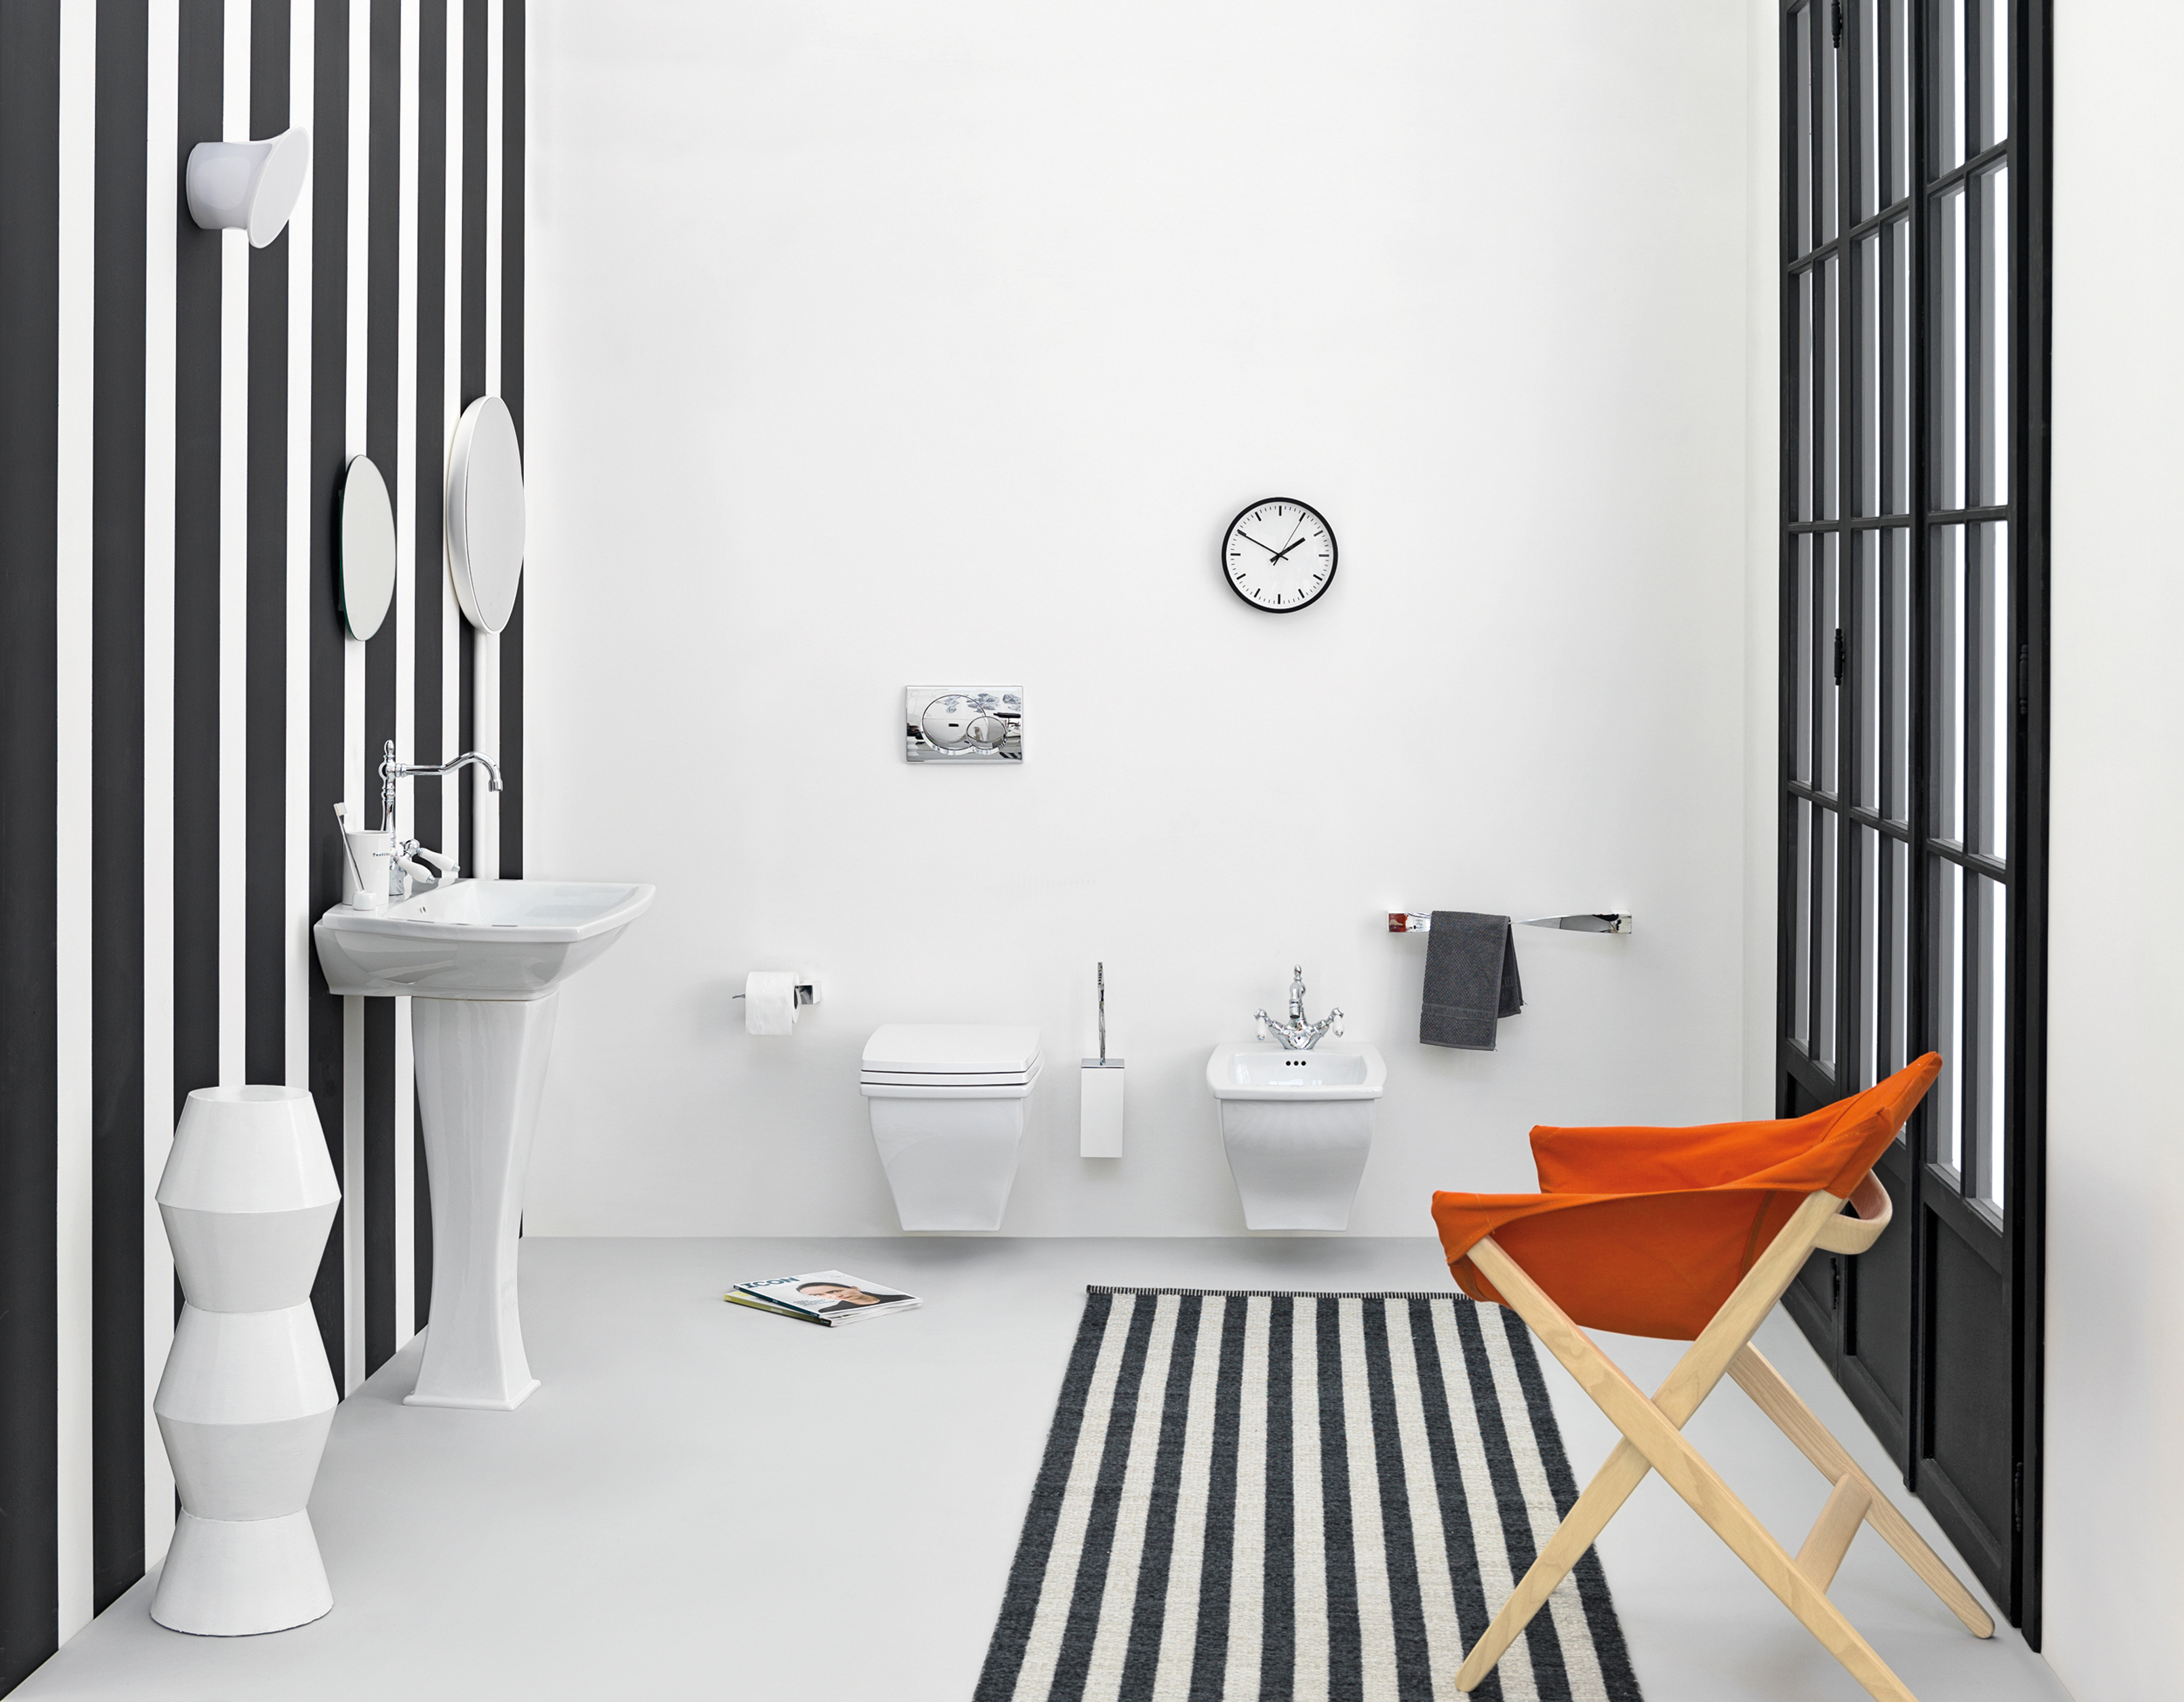 Orange accent chair looks captivating and fun in the cool black and white bath